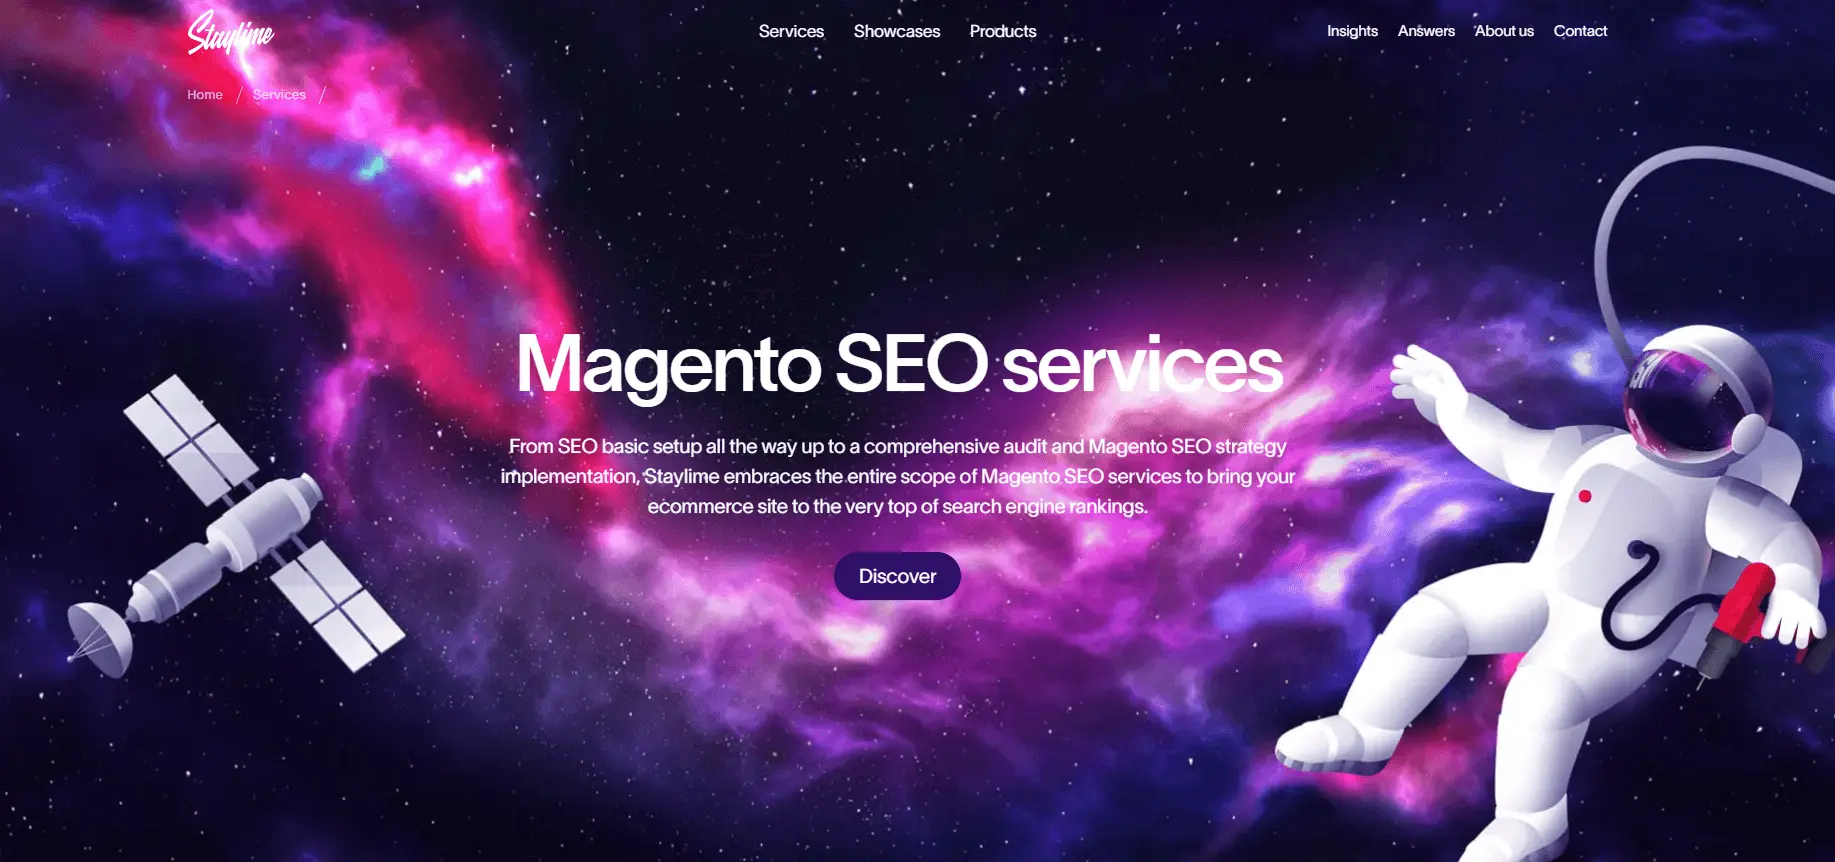 Magento SEO services by Staylime